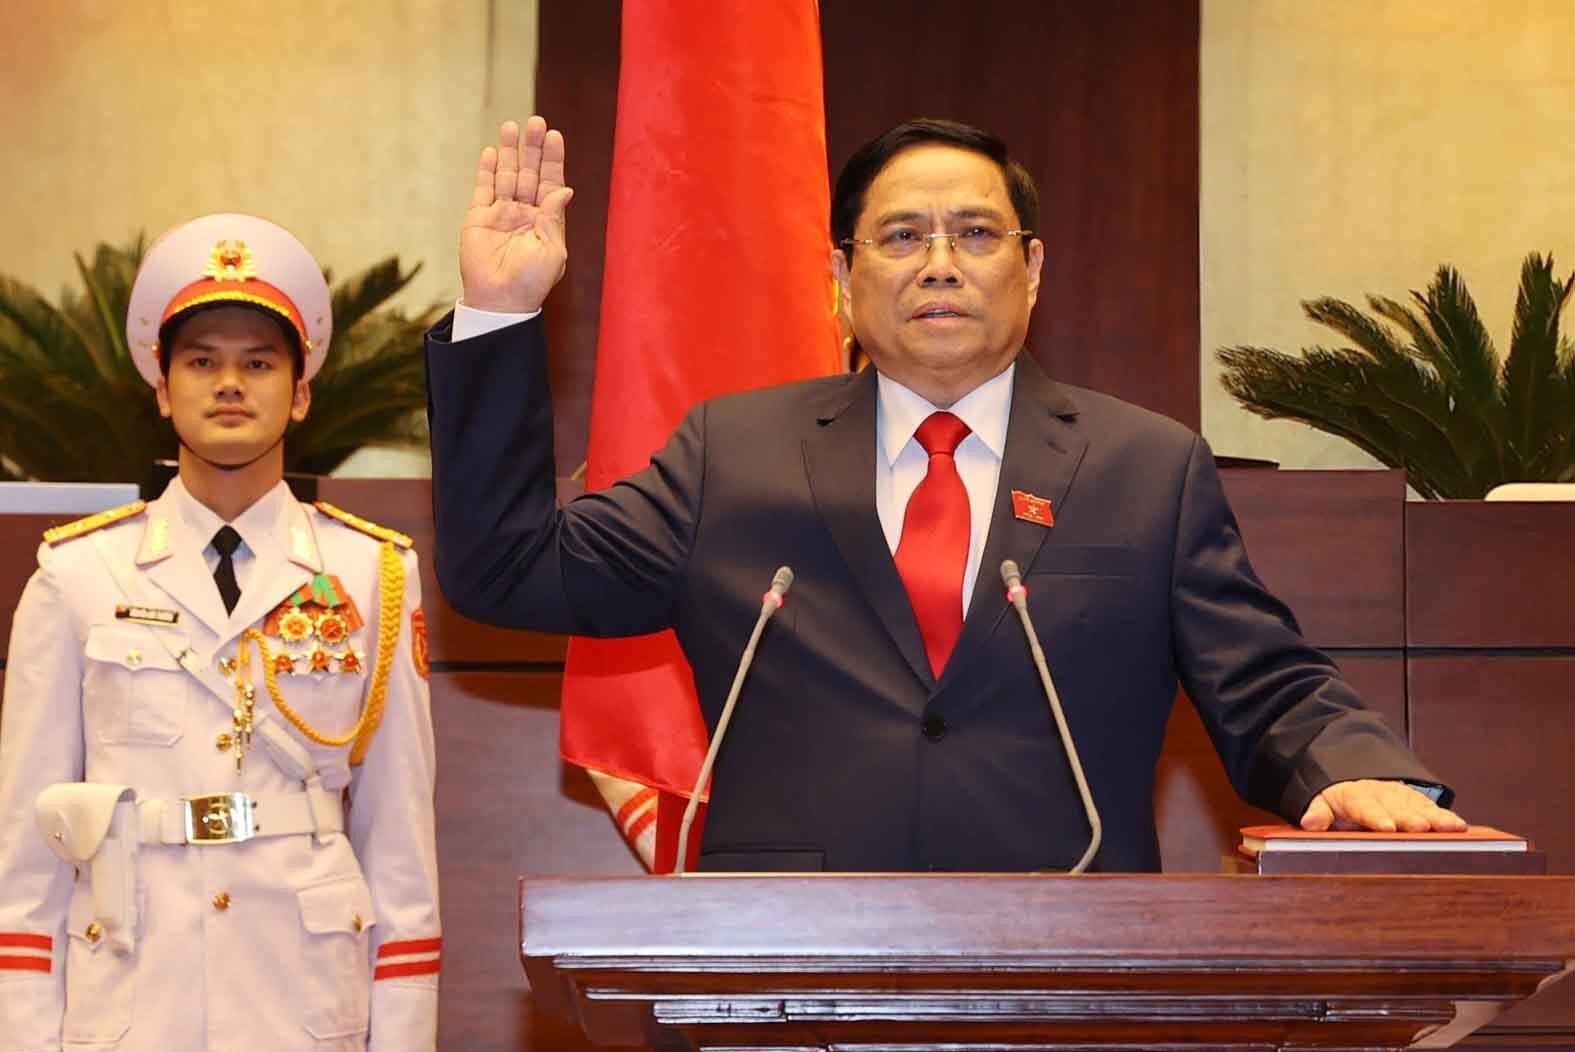 Pham Minh Chinh takes the oath of office after being elected as the prime minister in Hanoi, Vietnam, on Monday. Photo: EPA/Vietnam News Agency Handout